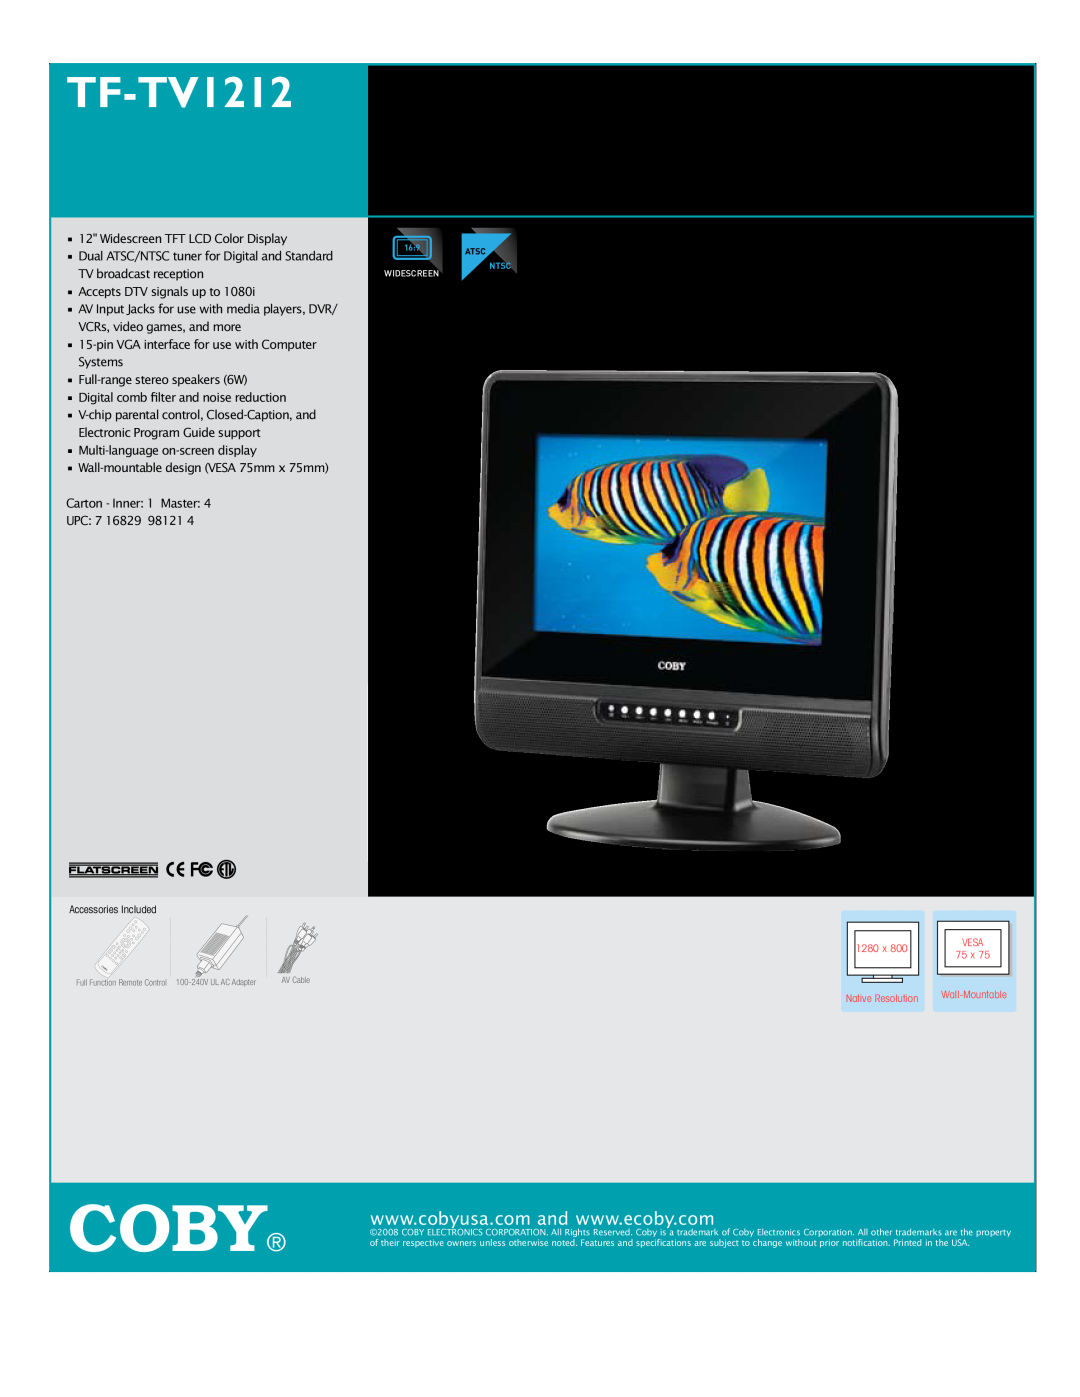 COBY electronic specifications Coby, TF-TV1212 12” WIDESCREEN LCD DIGITAL TV/MONITOR 